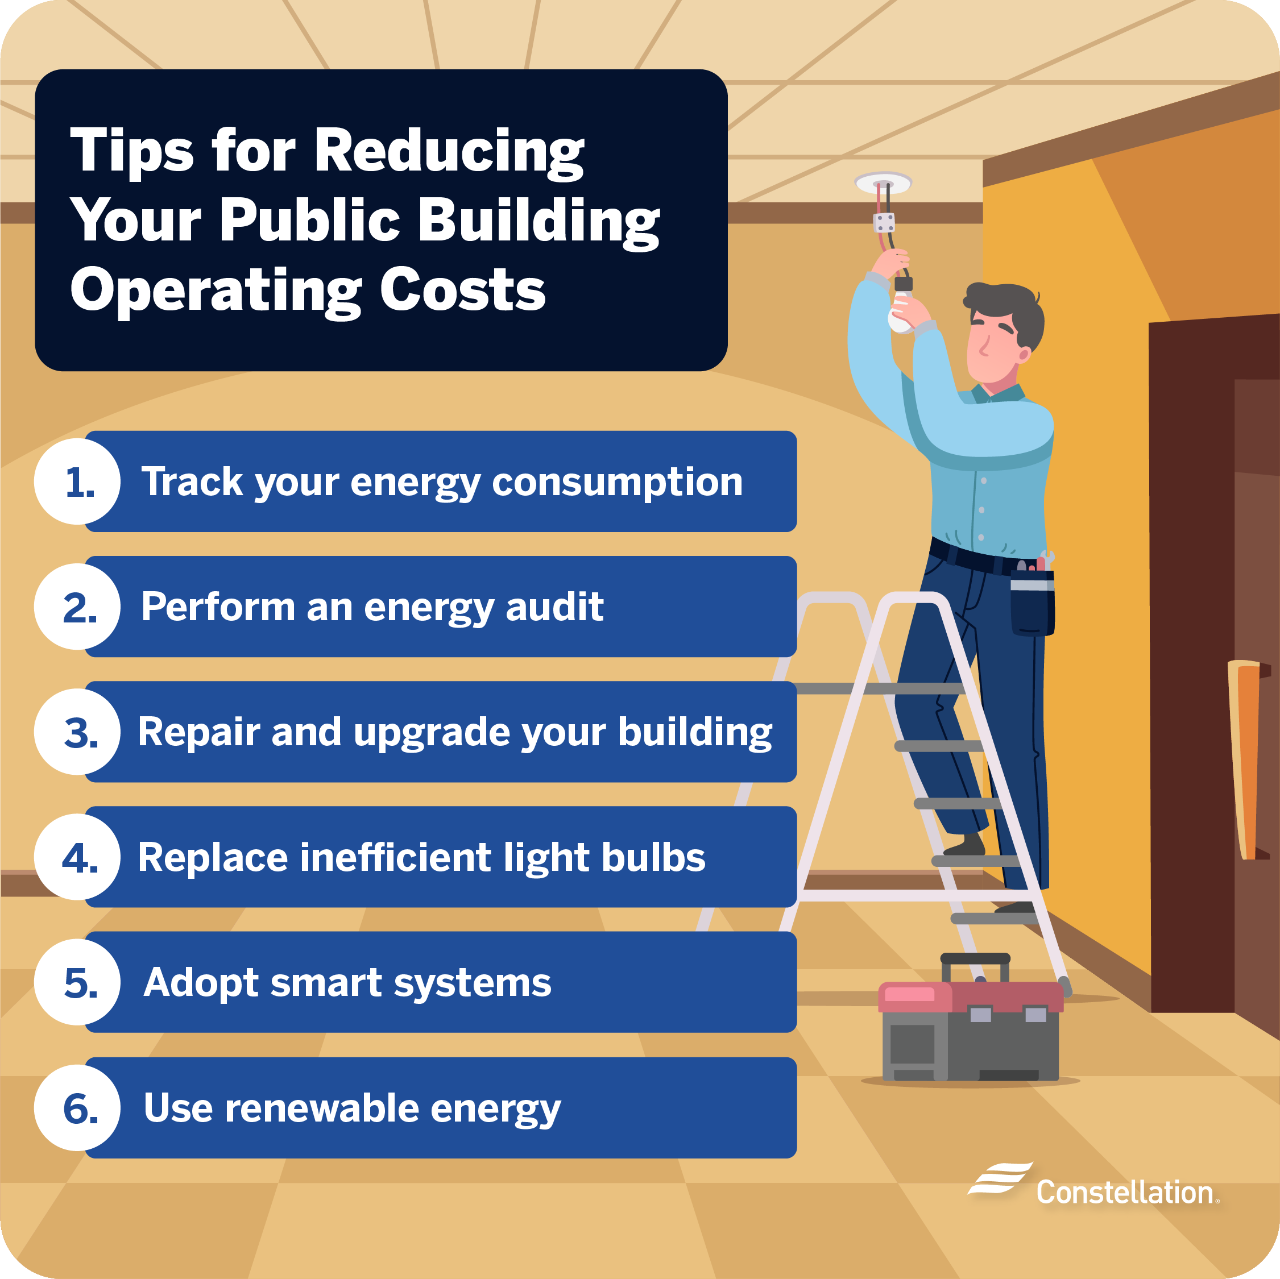 How to reduce public building operating costs.